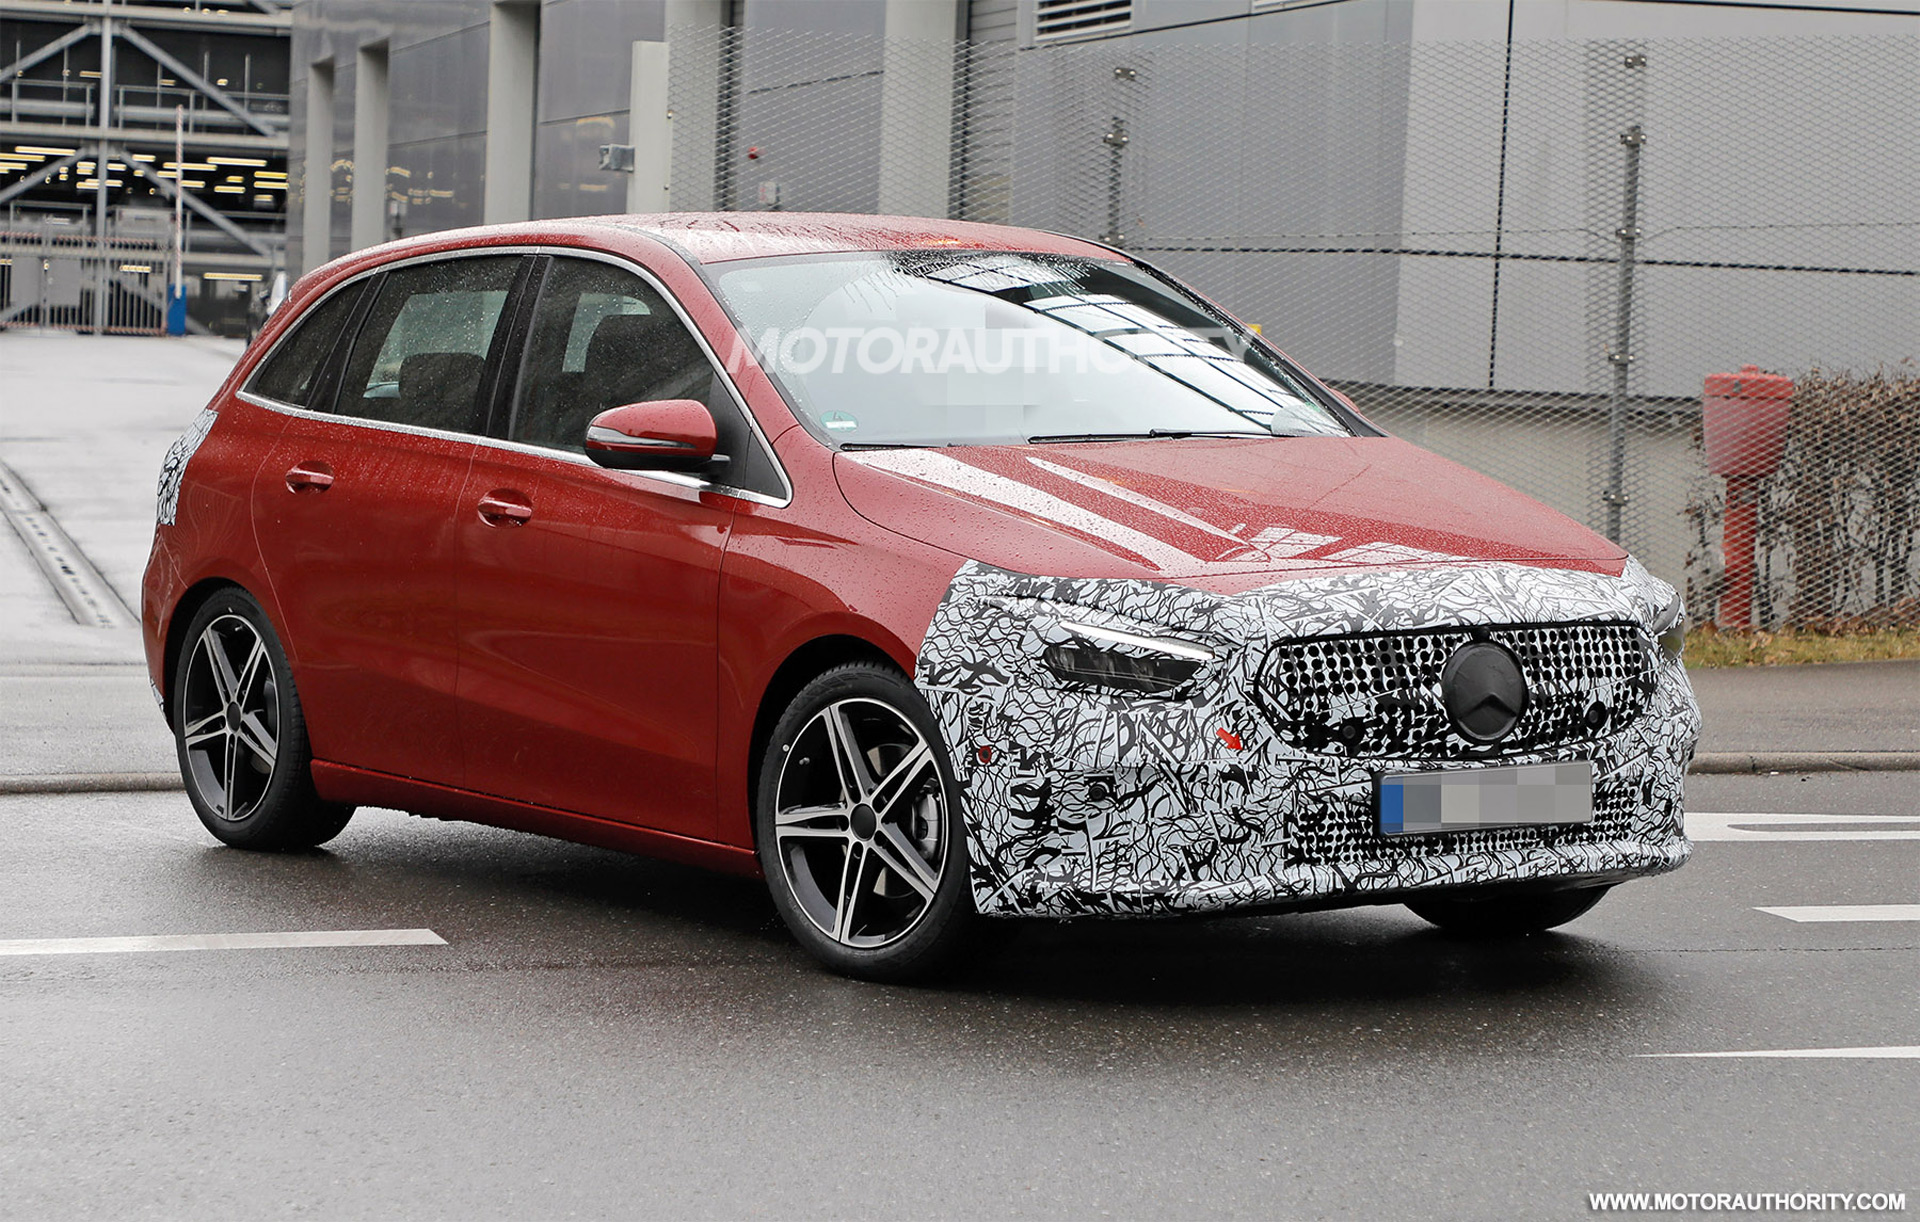 Mercedes B-Class Facelift Spied, Will Probably Be The Last Of Its Kind